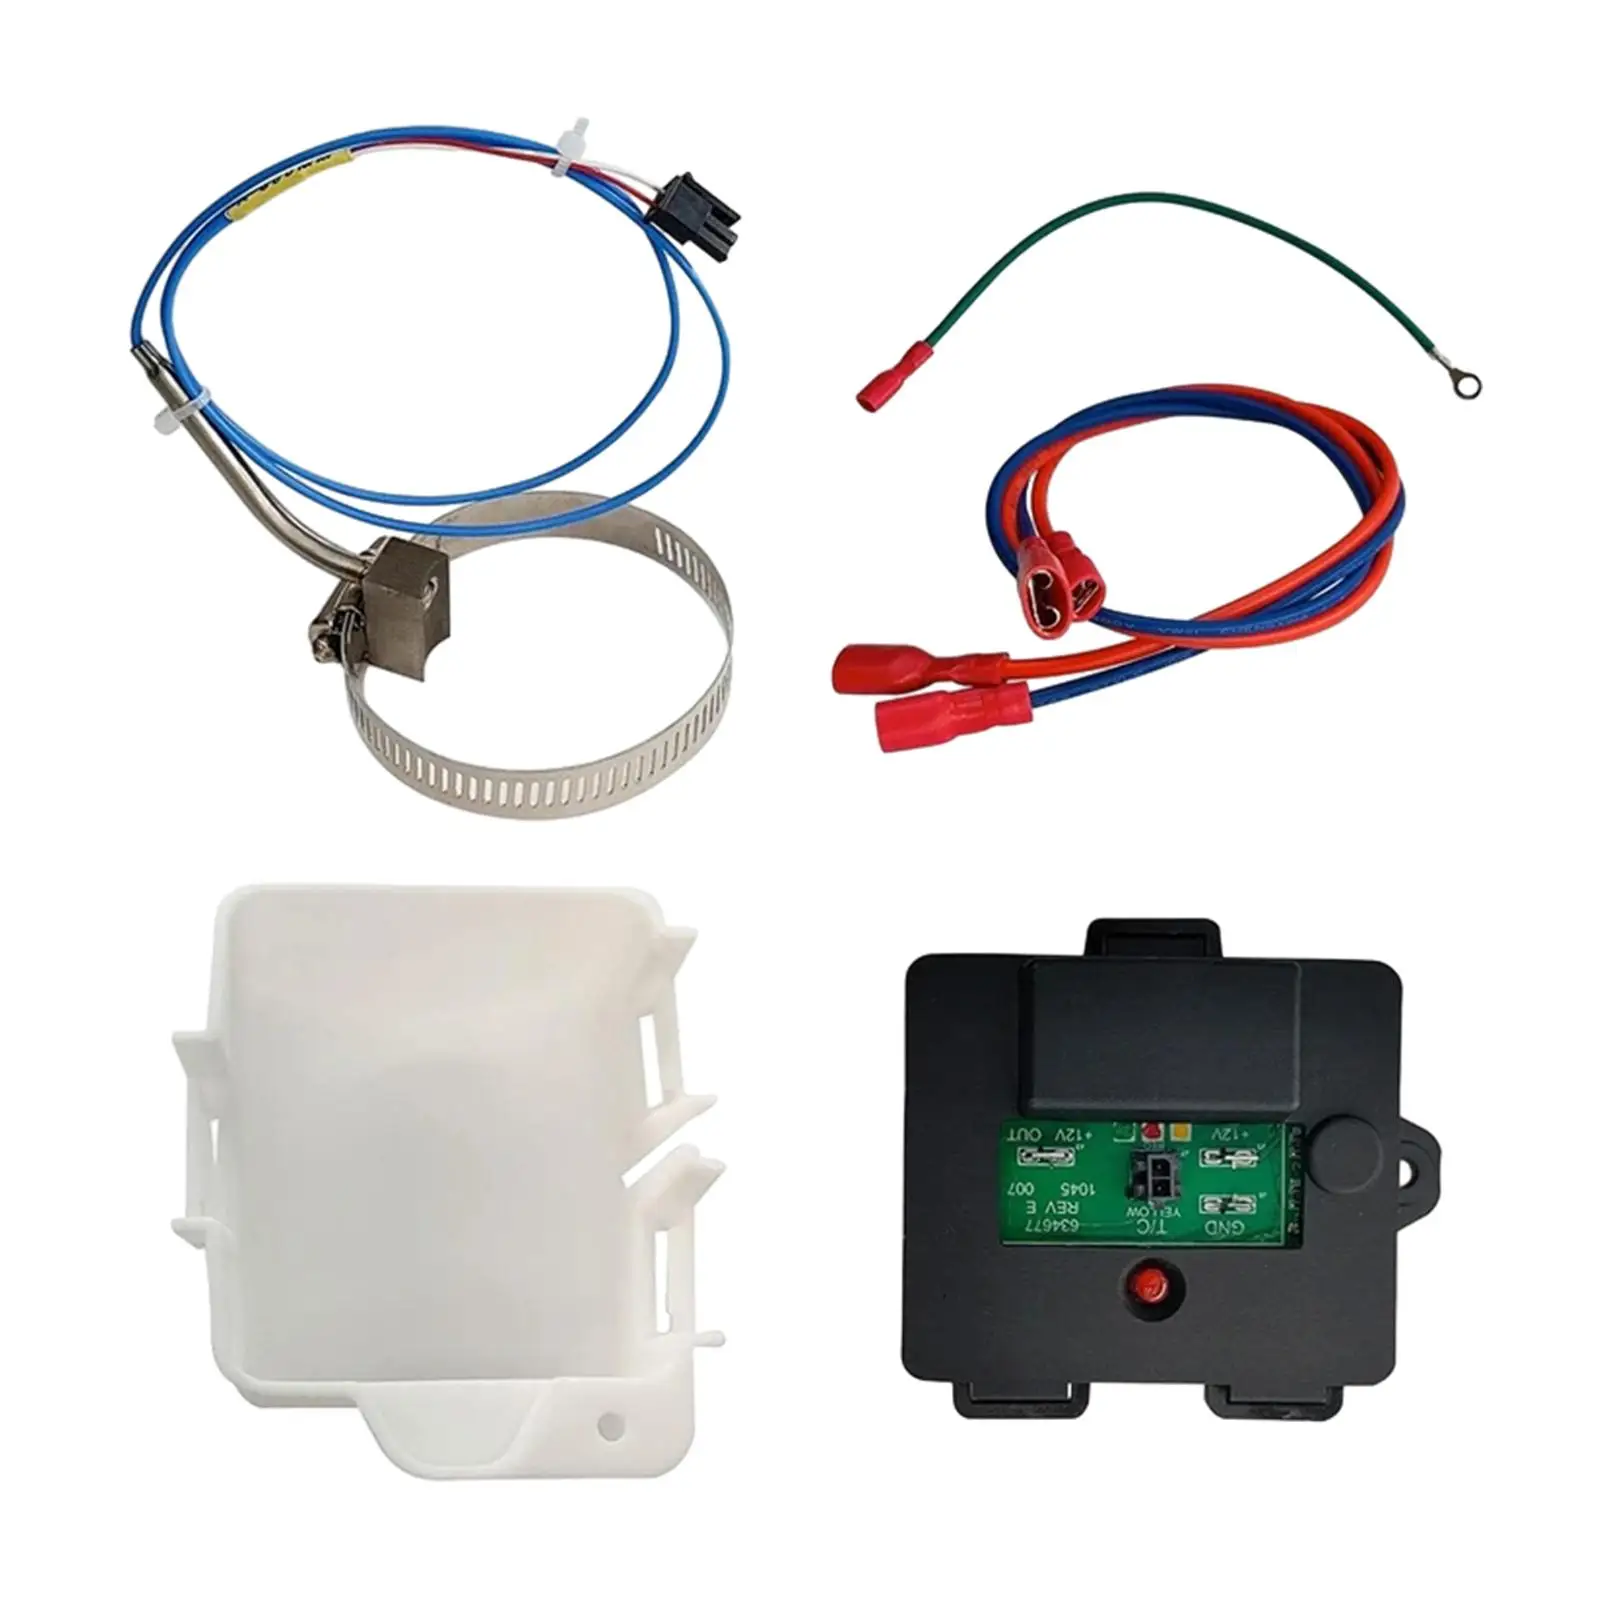 637360 Temp Monitor Control Kits Replacement Parts Professional Cooling Control Kits for 2118-1210 Restaurant Hotel Industrial